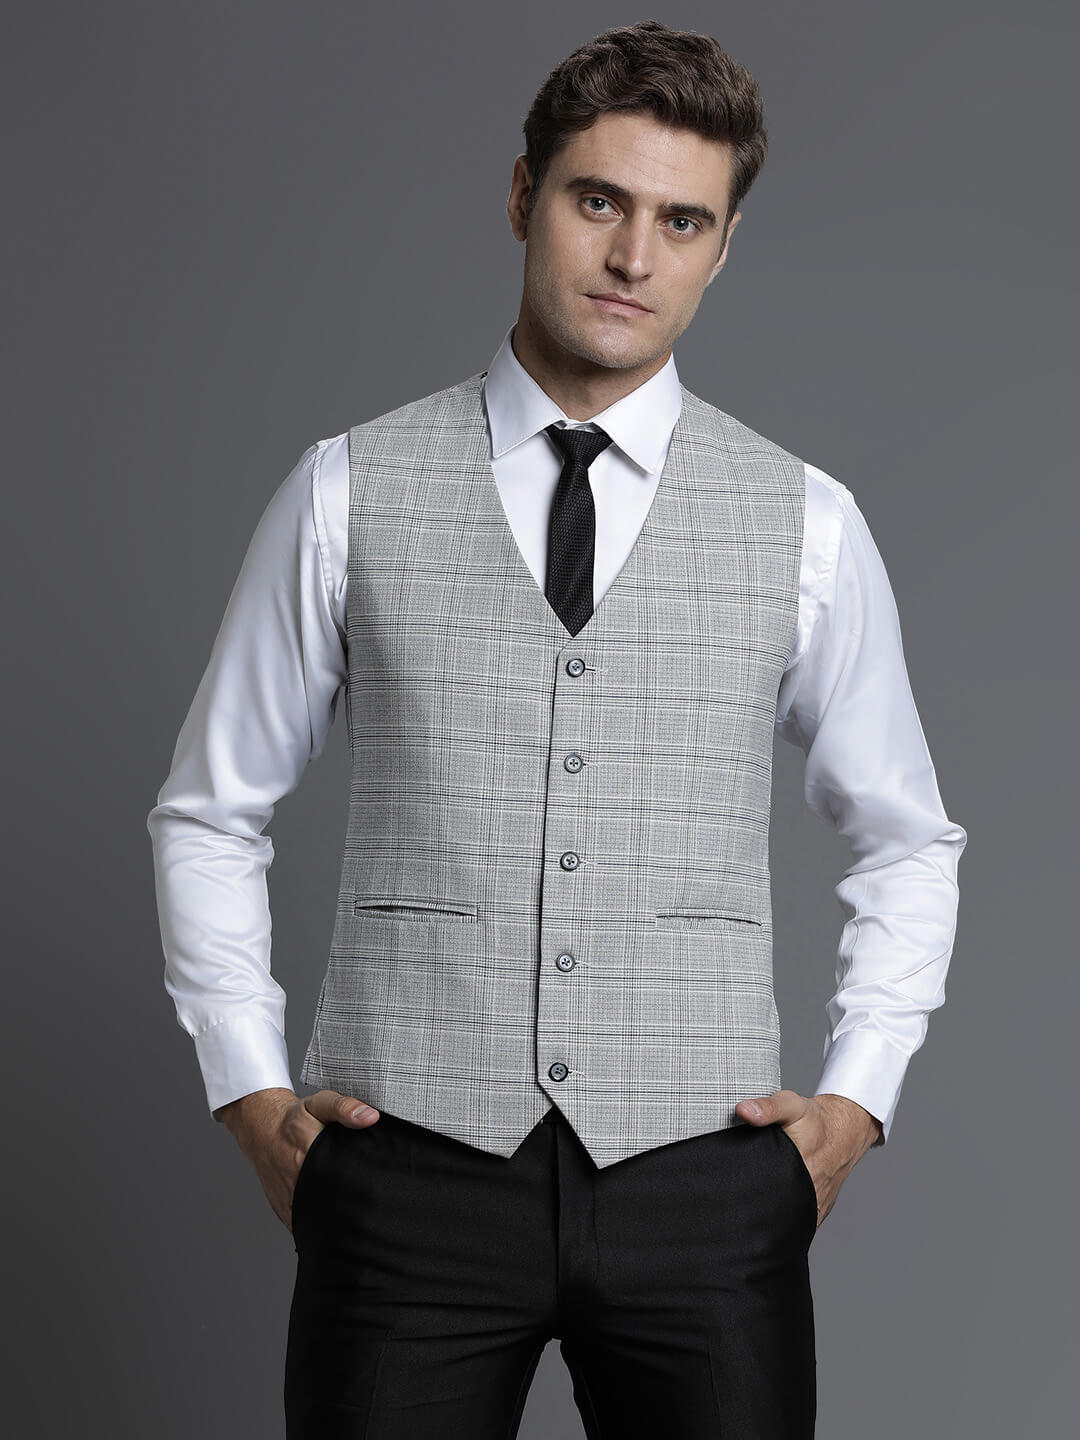 Suits, Blazers, Tuxedos & Waistcoats for Rent at Best Price | CandidMen